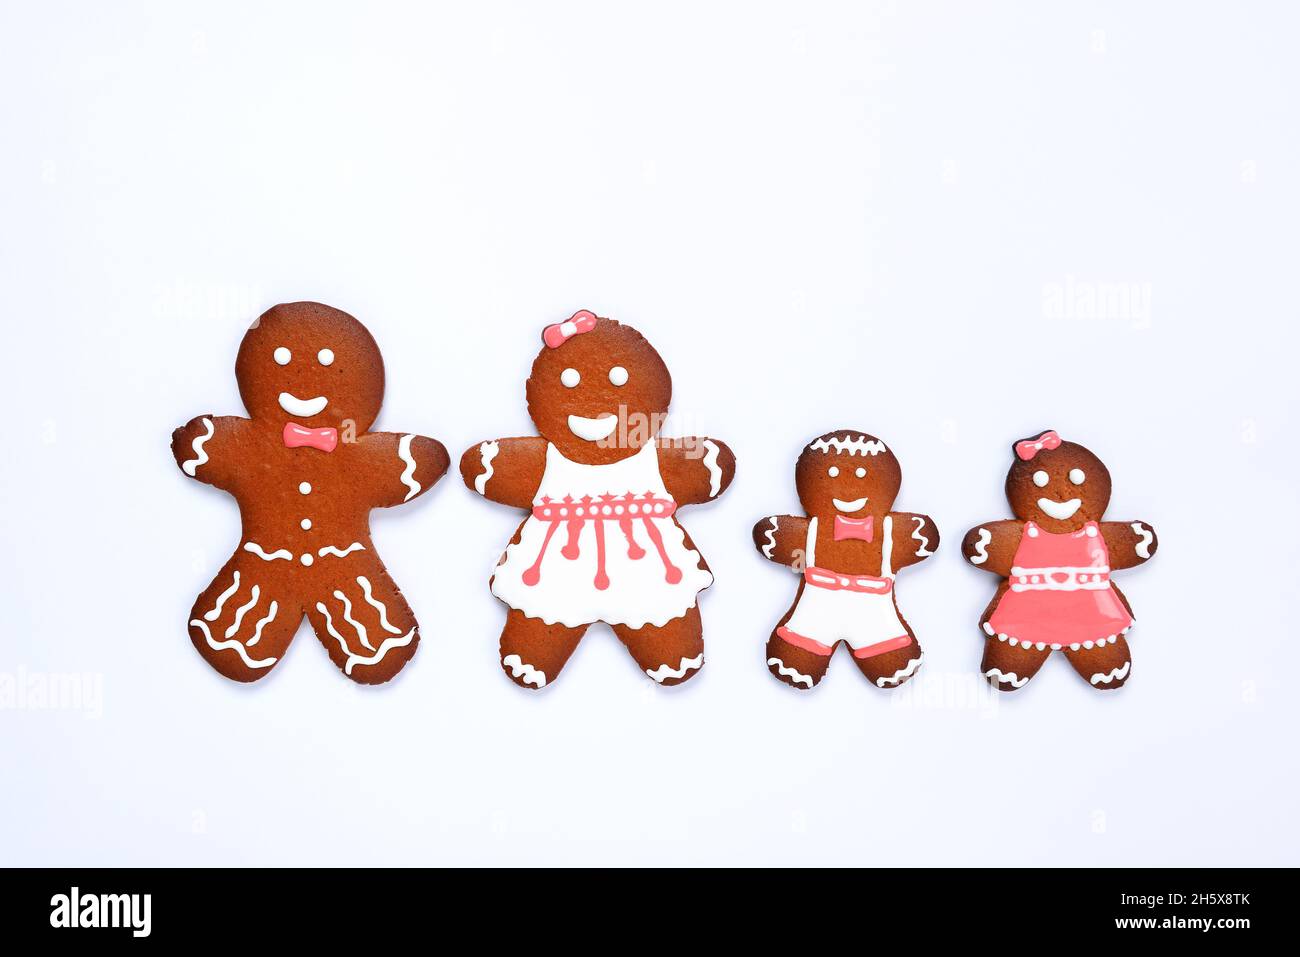 The hand-made eatable gingerbread house, little men on white background Stock Photo